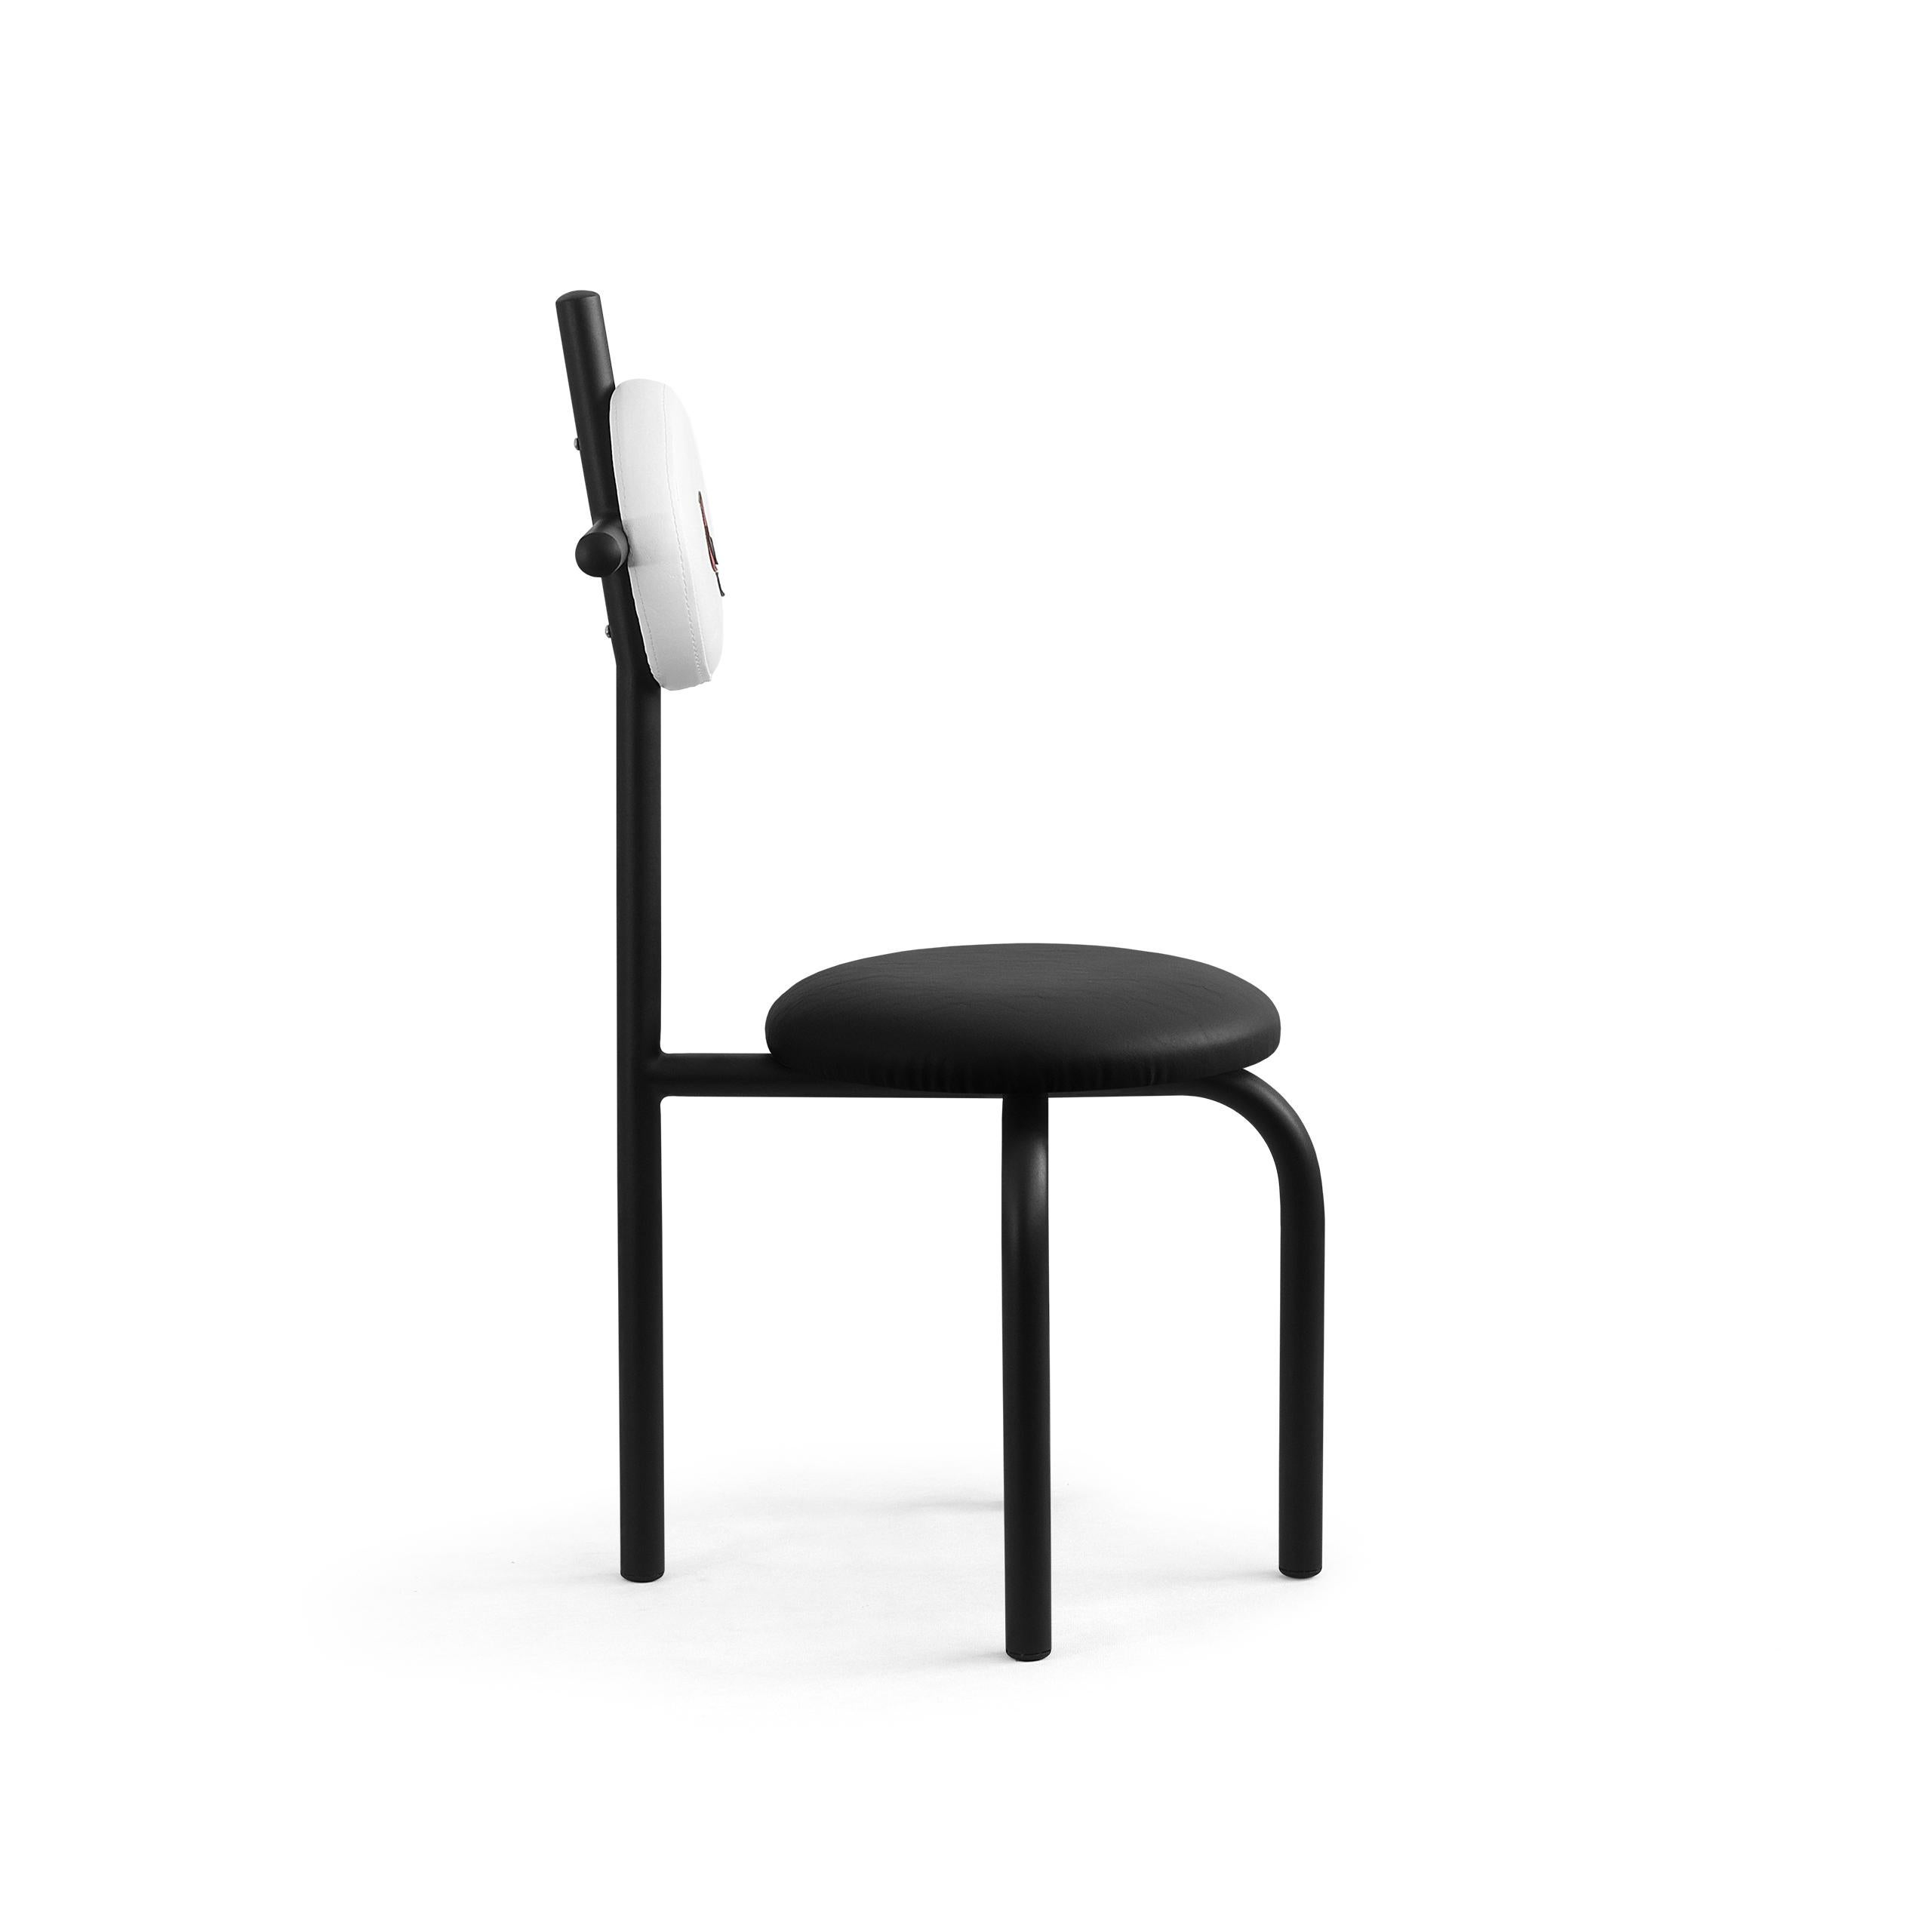 Brazilian PK16 Impermeable Chair, Black Seat & Carbon Steel Structure by Paulo Kobylka For Sale